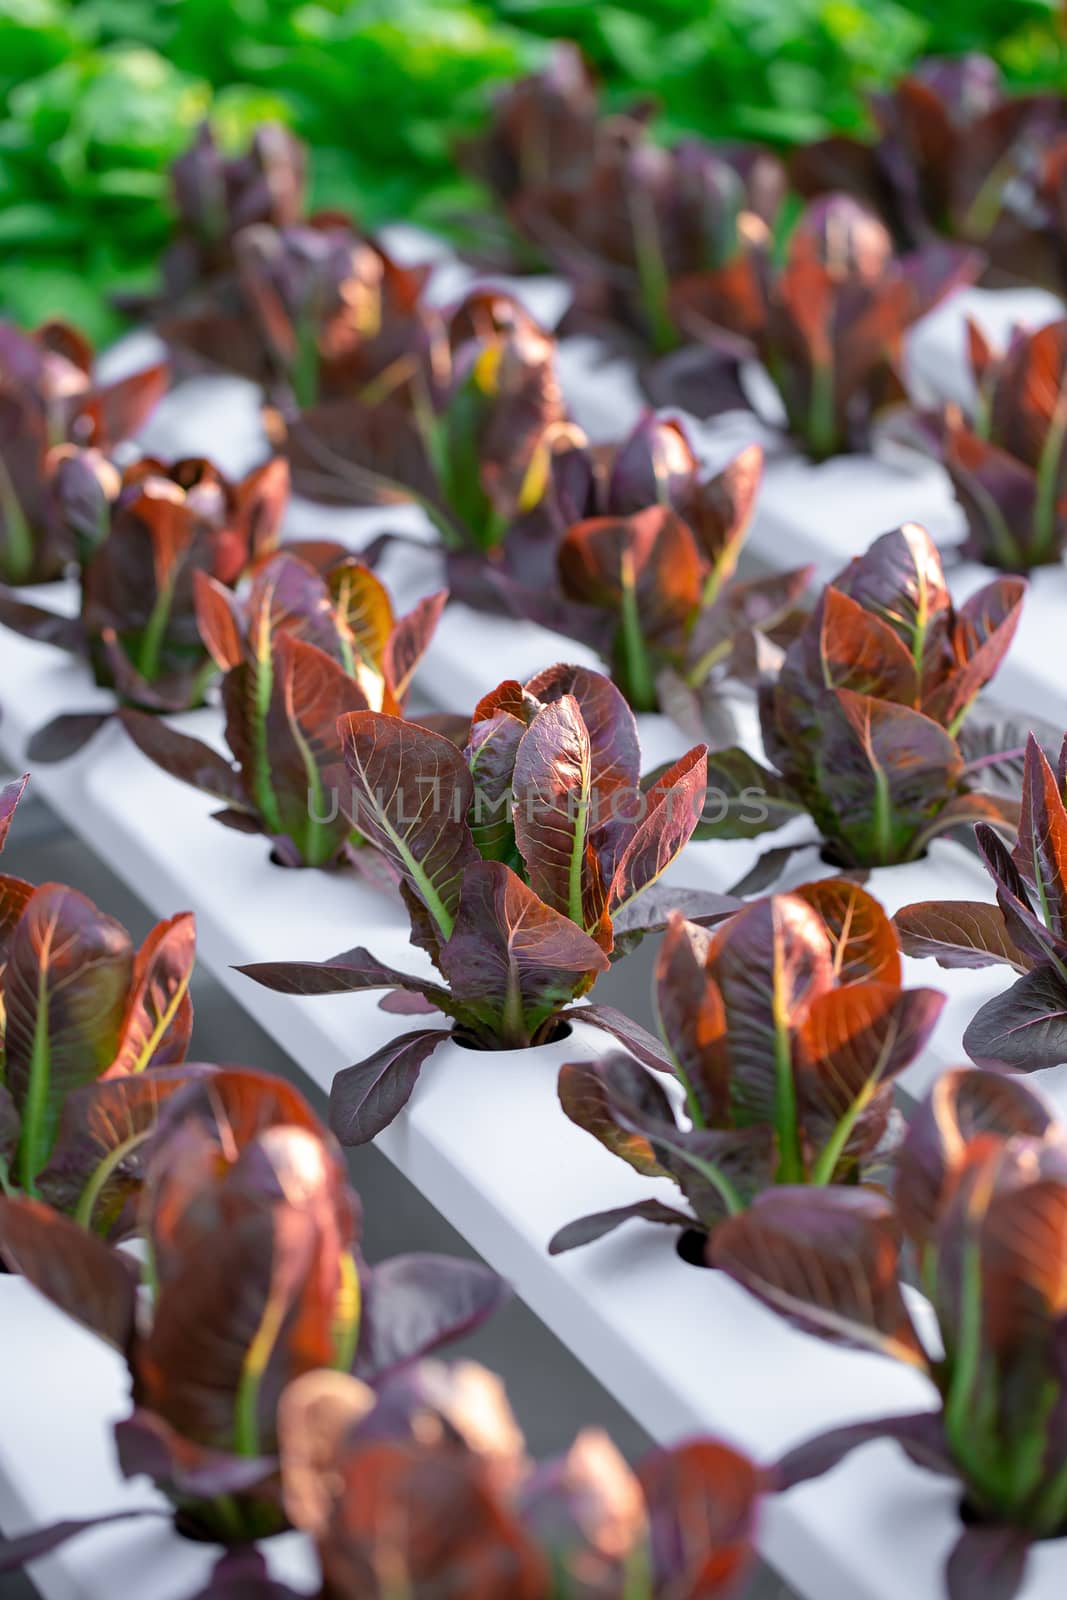 Red Cos lettuce leaves, Salads vegetable hydroponics in the agricultural farm.